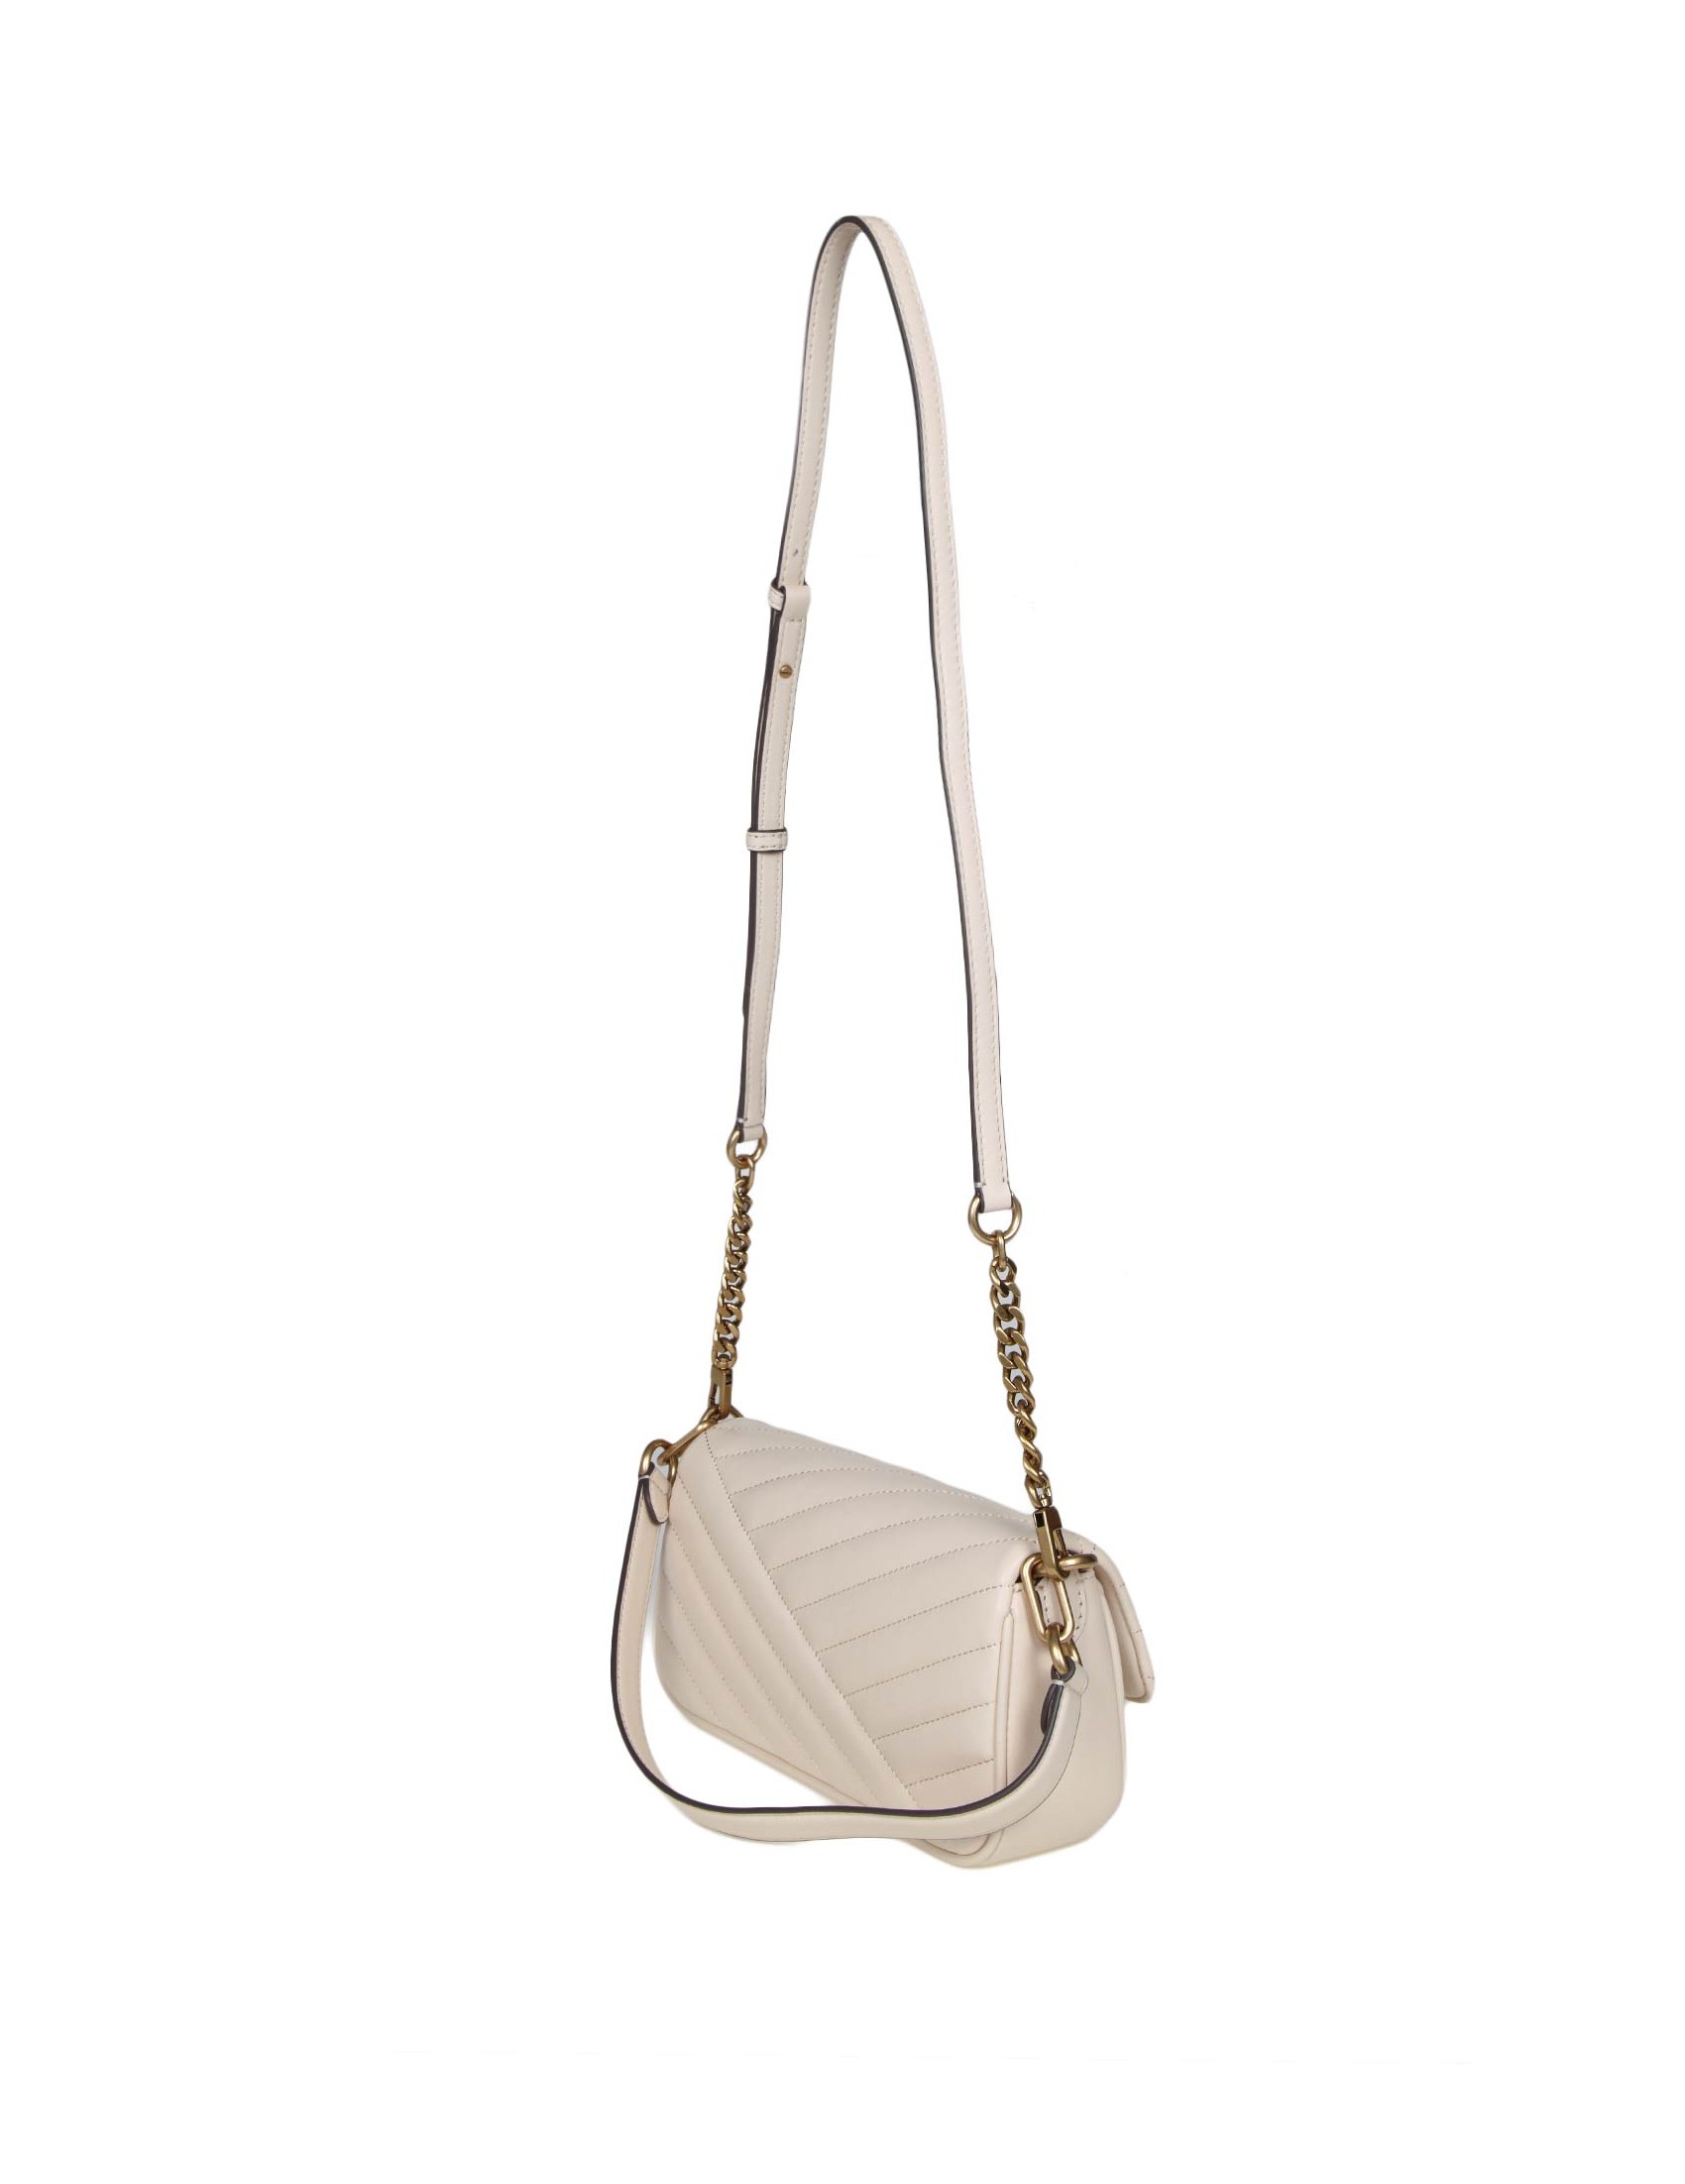 TORY BURCH KIRA SMALL CHEVRON IN LEATHER WITH FLAP